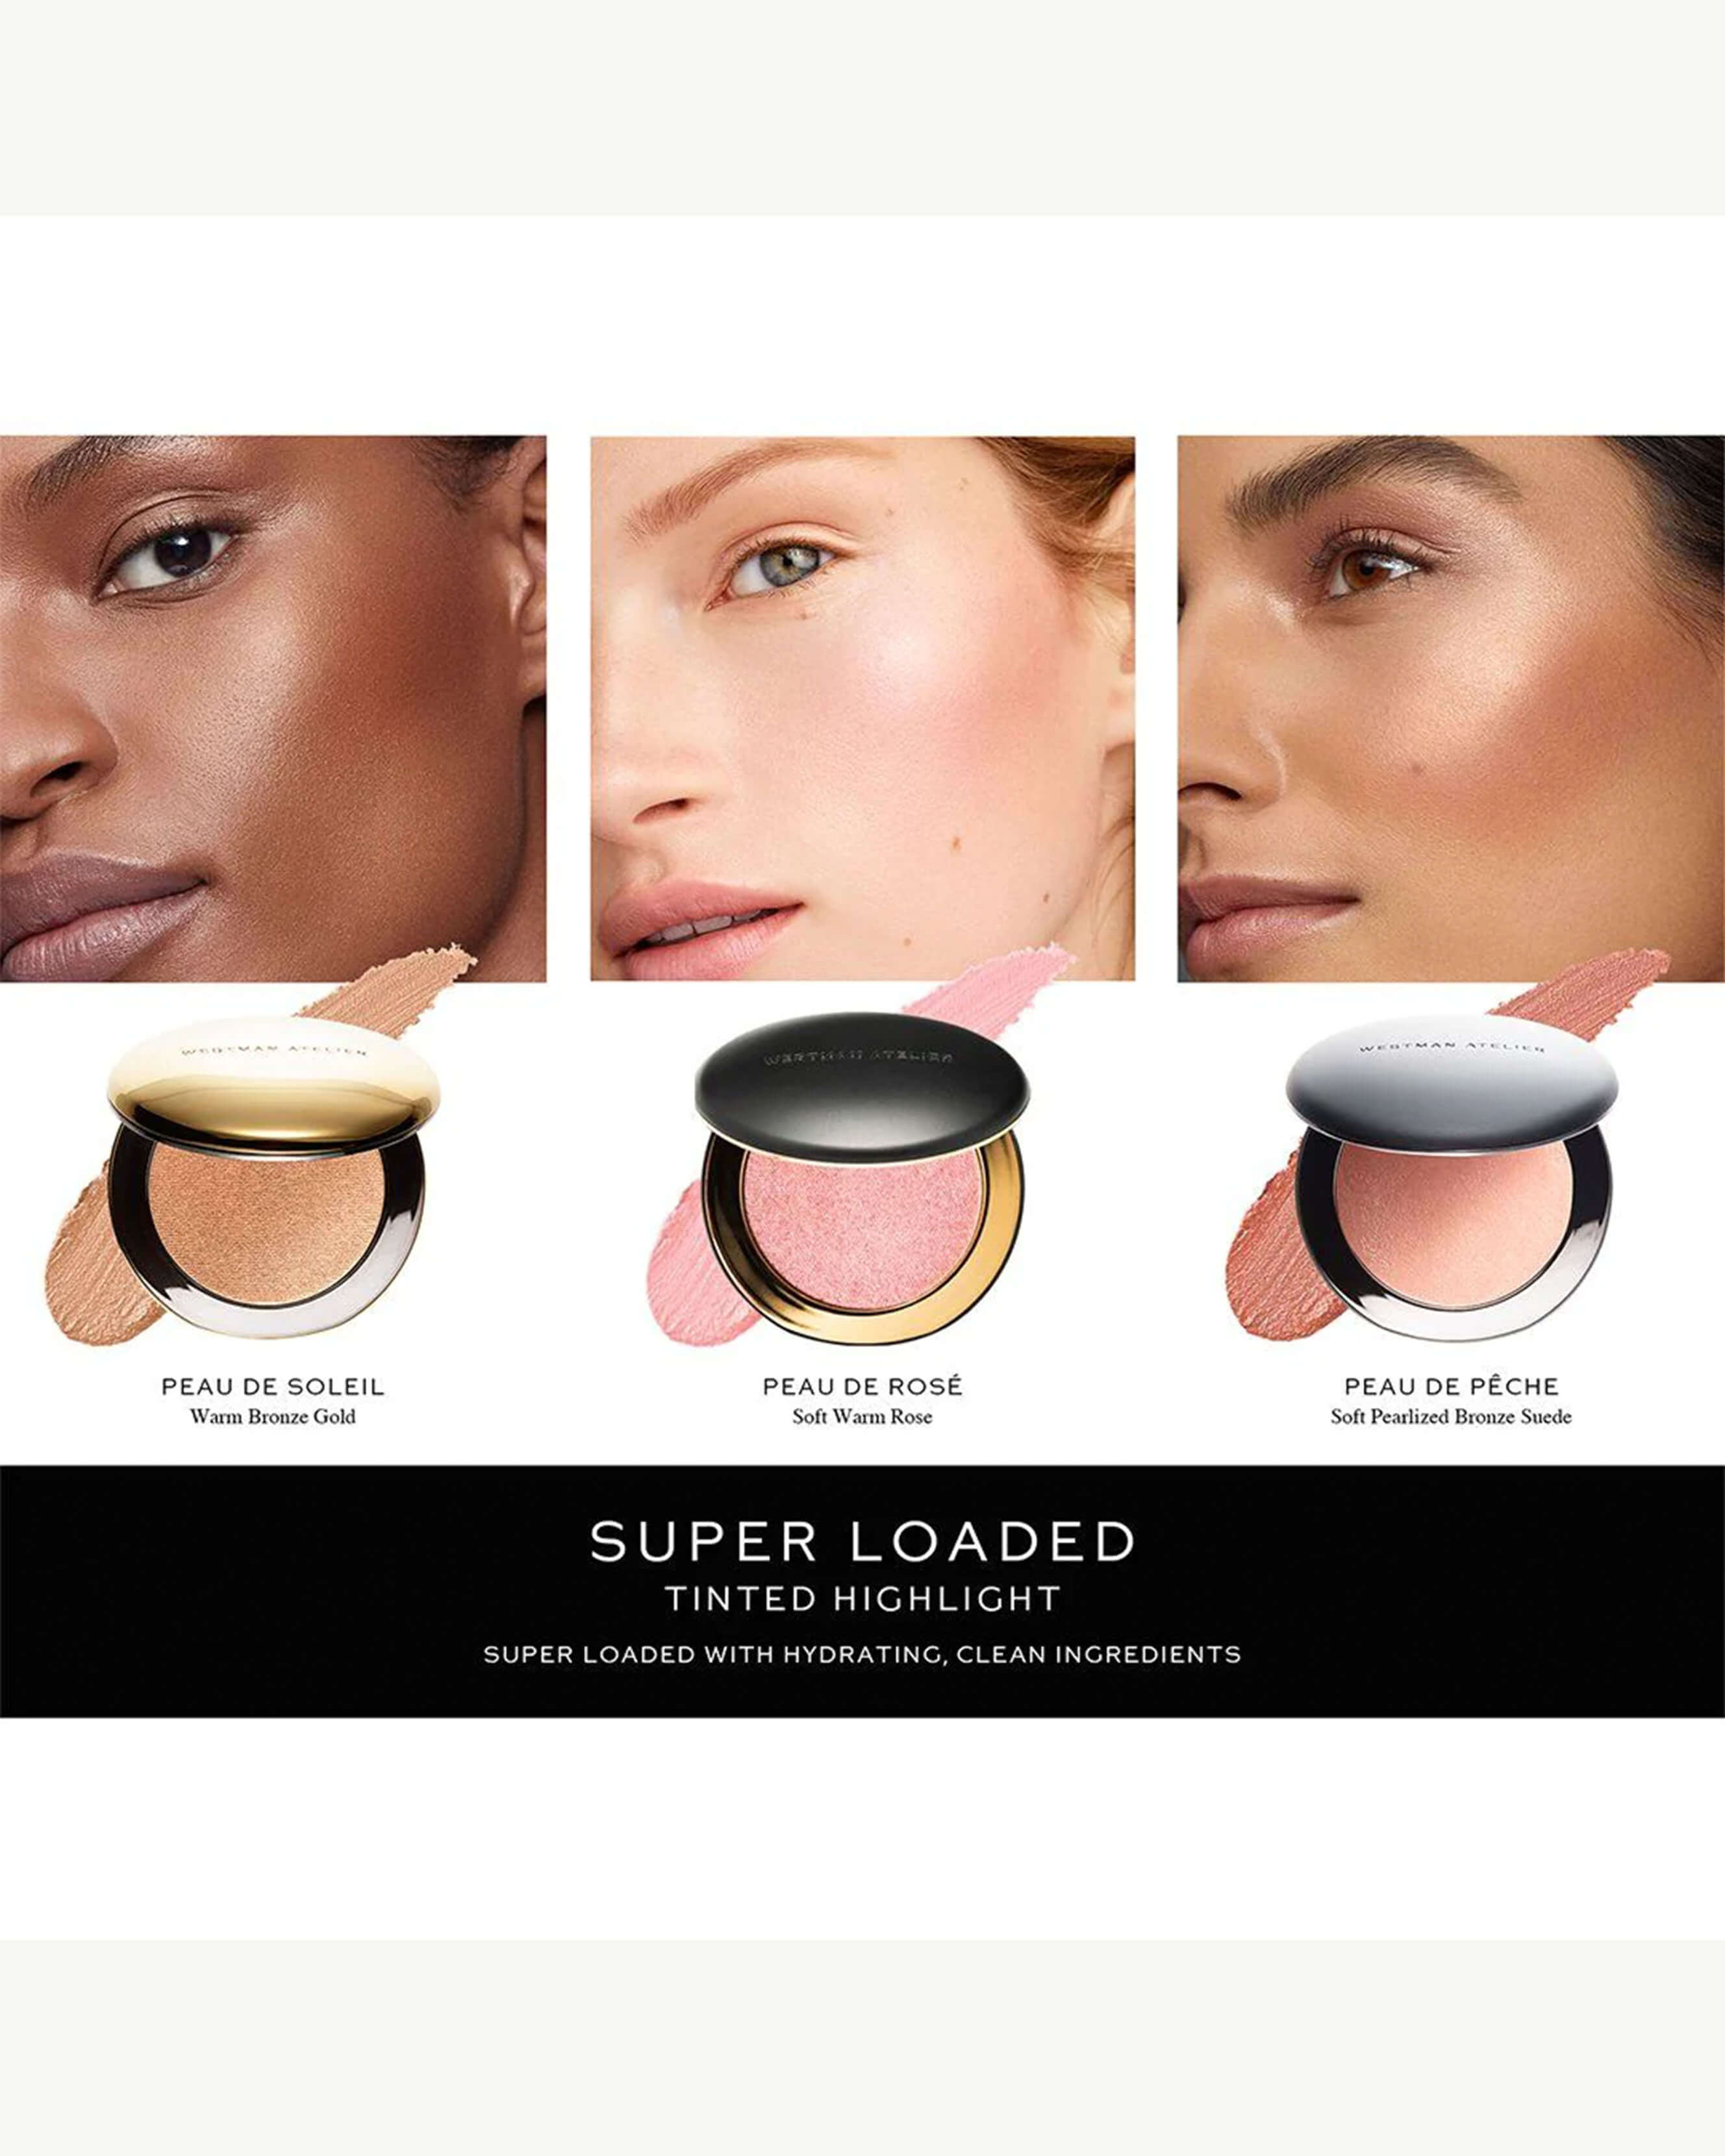 Super Loaded Tinted Highlight – Credo